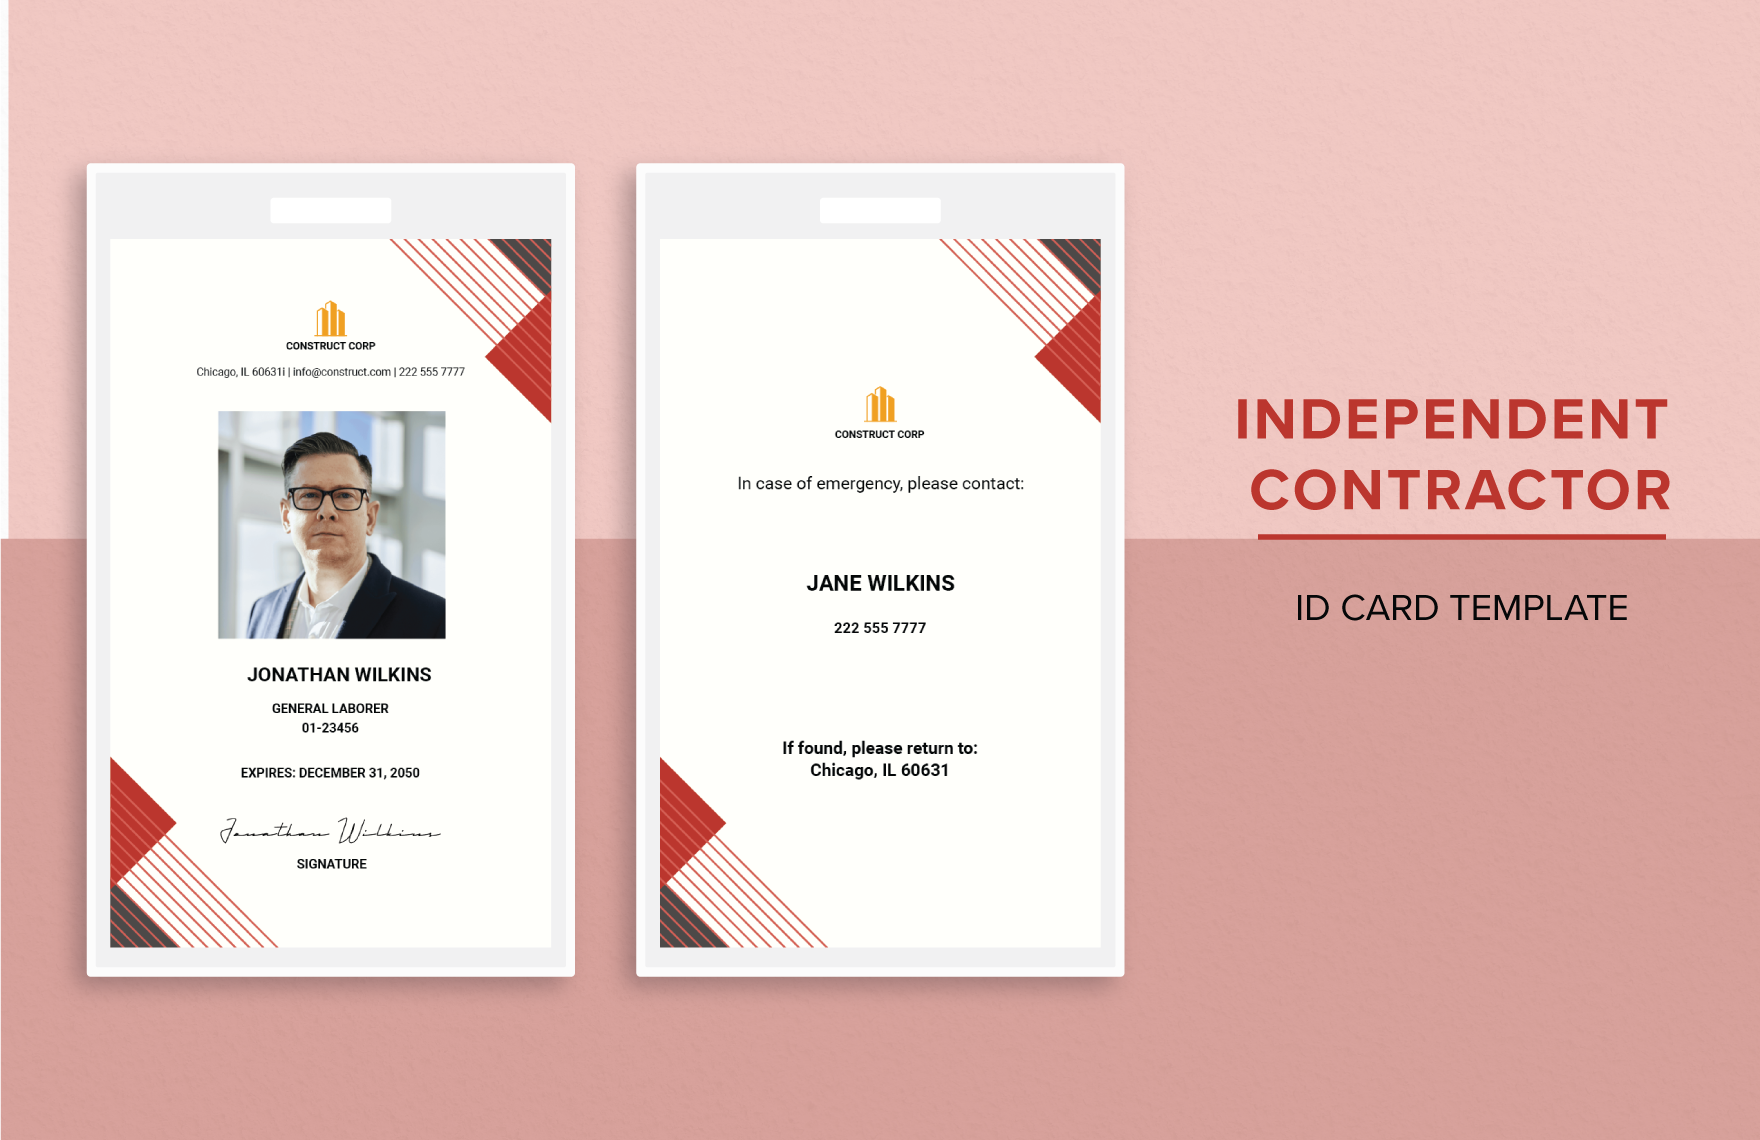 Independent Contractor ID Card Template